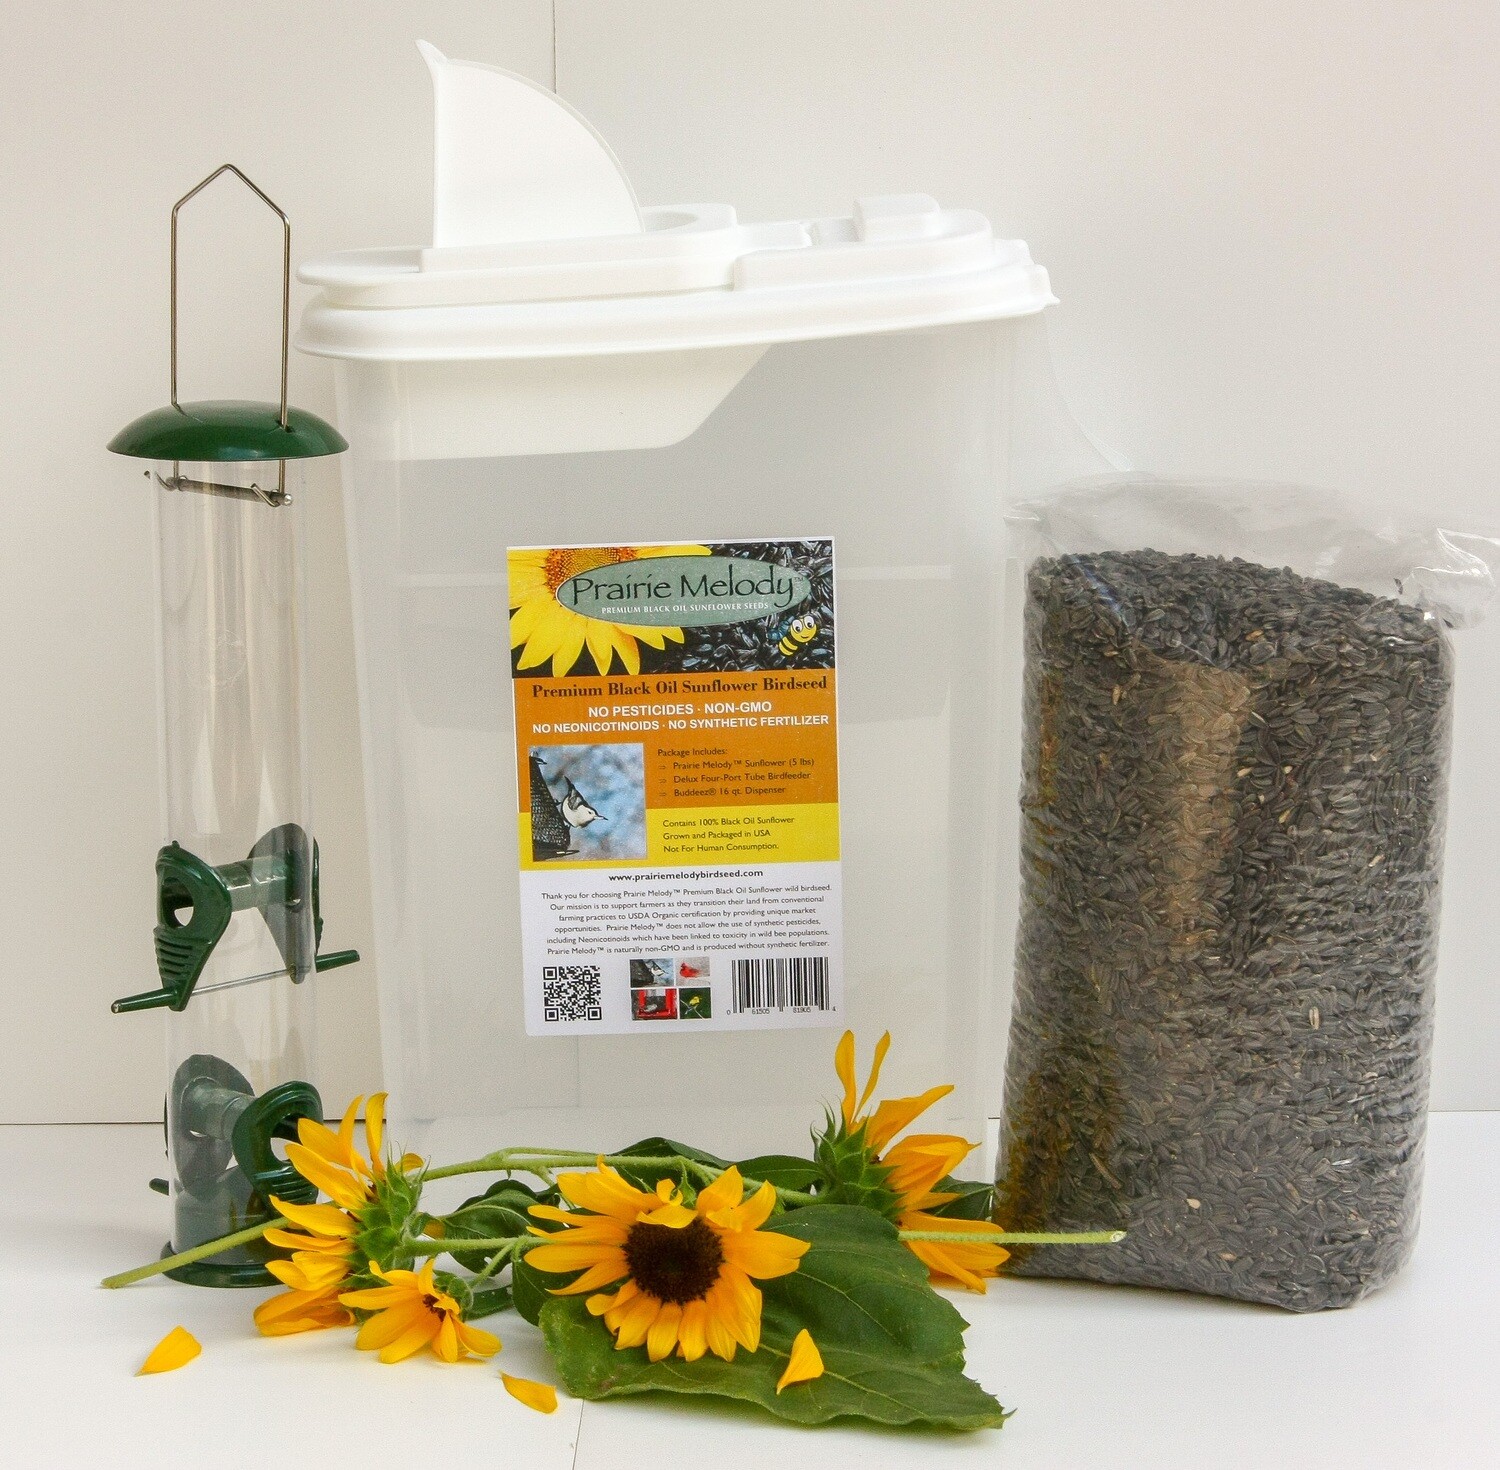 **** FREE SHIPPING **** Deluxe Gift Set - 5 lbs Premium Sunflower Birdseed, Deluxe Tube Feeder, 16-qt Pour Spout Container